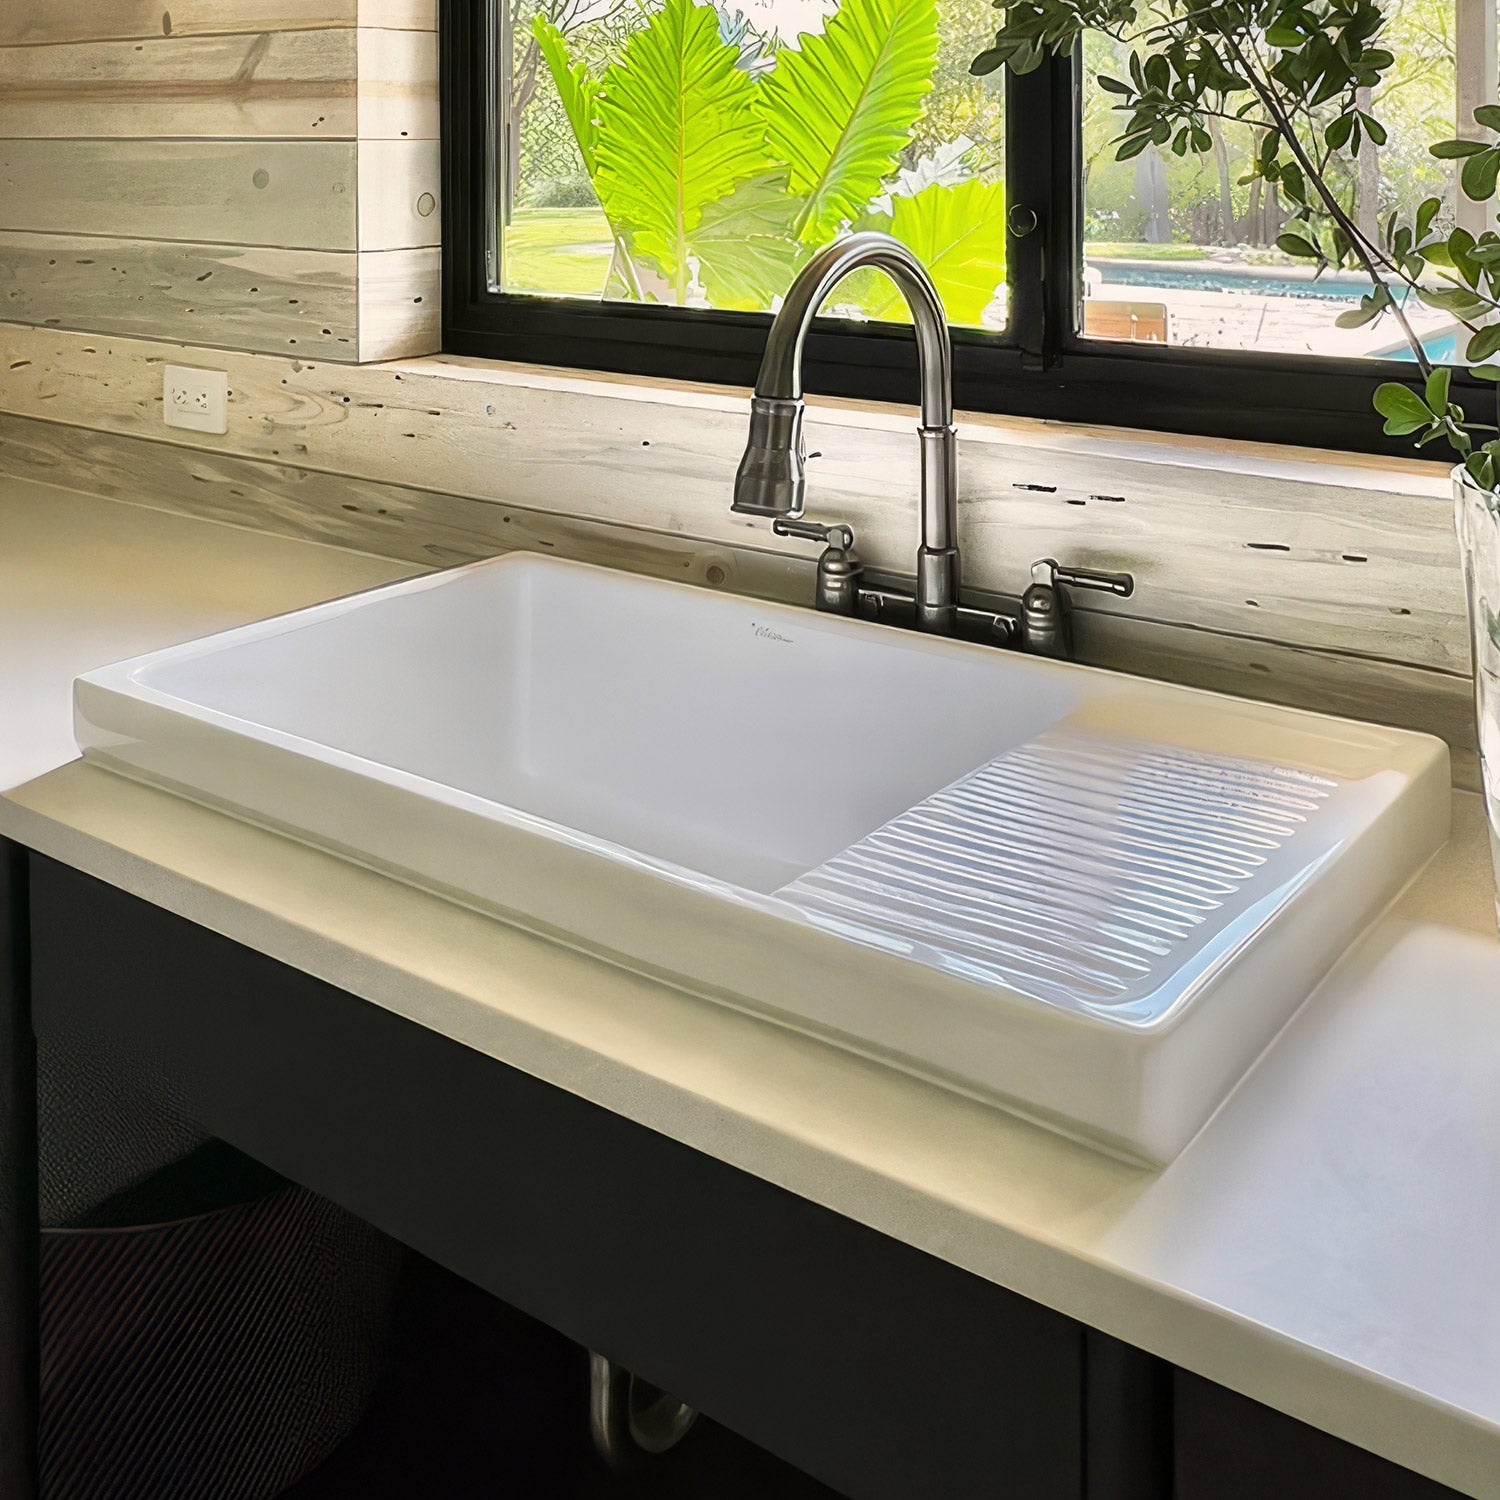 36" Large reversible fireclay kitchen sink with integral drainboard